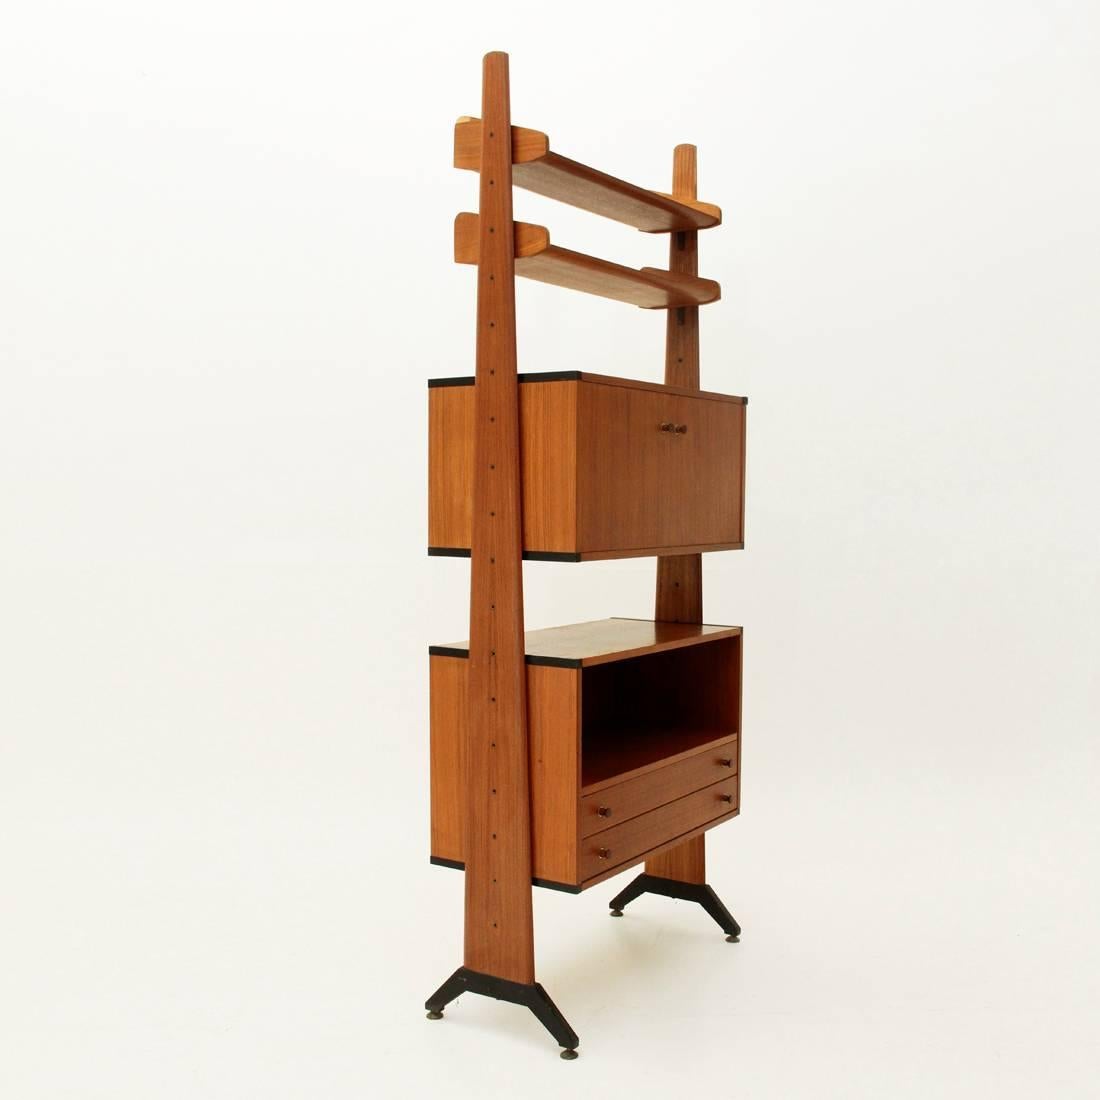 Italian Library produced in the 1960s by AV Arredamenti Contemporanei.
Teak veneered wooden stairs with black varnished metal base and adjustable brass feet.
Teak veneered wooden shelves and containers.
Handles in wood with brass seal.
Brass